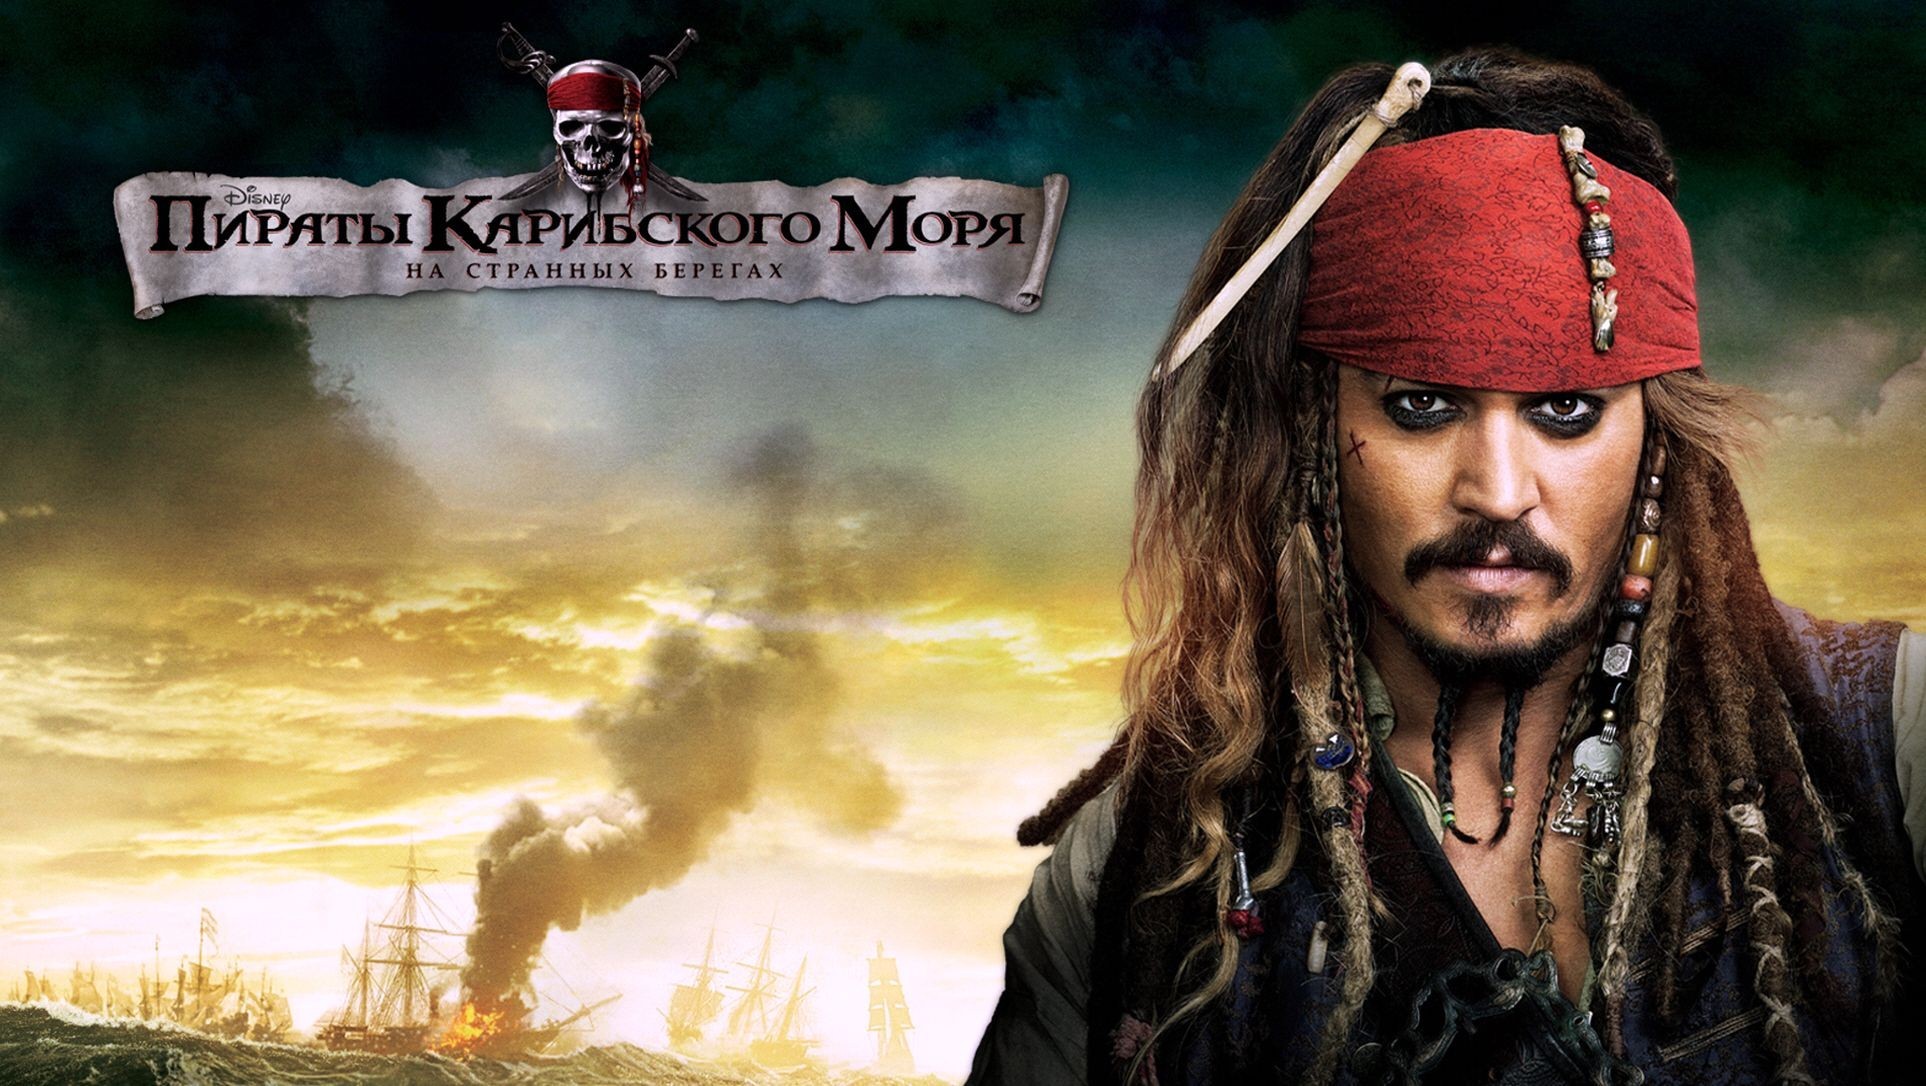 Pirates Of The Caribbean Movie Cover - Johnny Depp Caribbean Movies - HD Wallpaper 